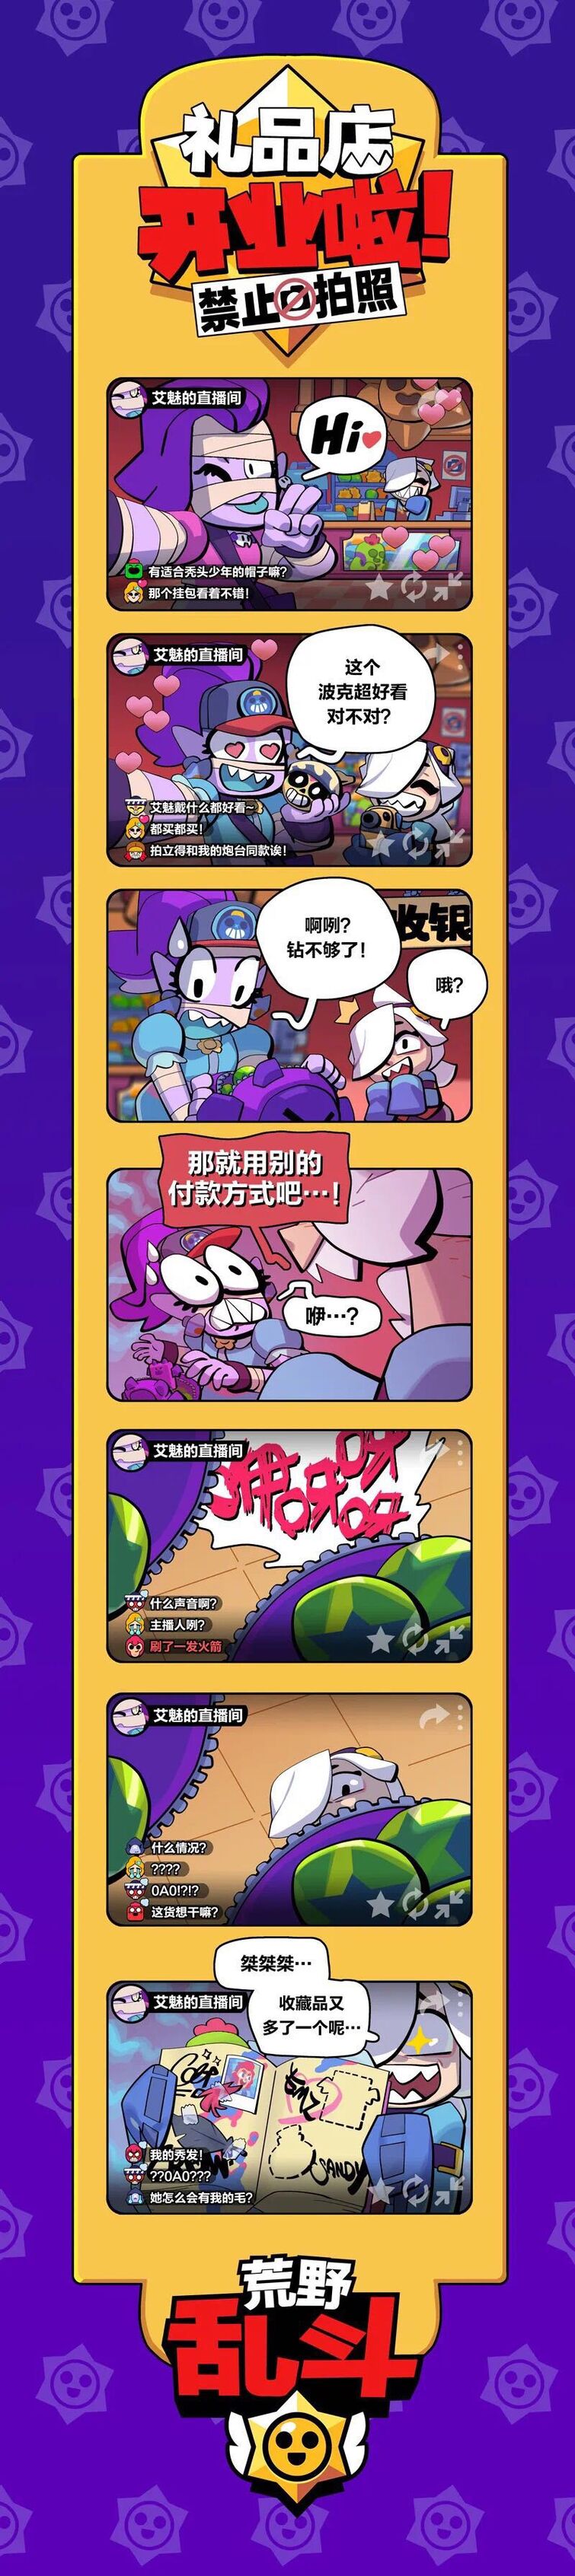 Chinese Comic No Photos In The Gift Shop Fandom - gift shop brawl stars